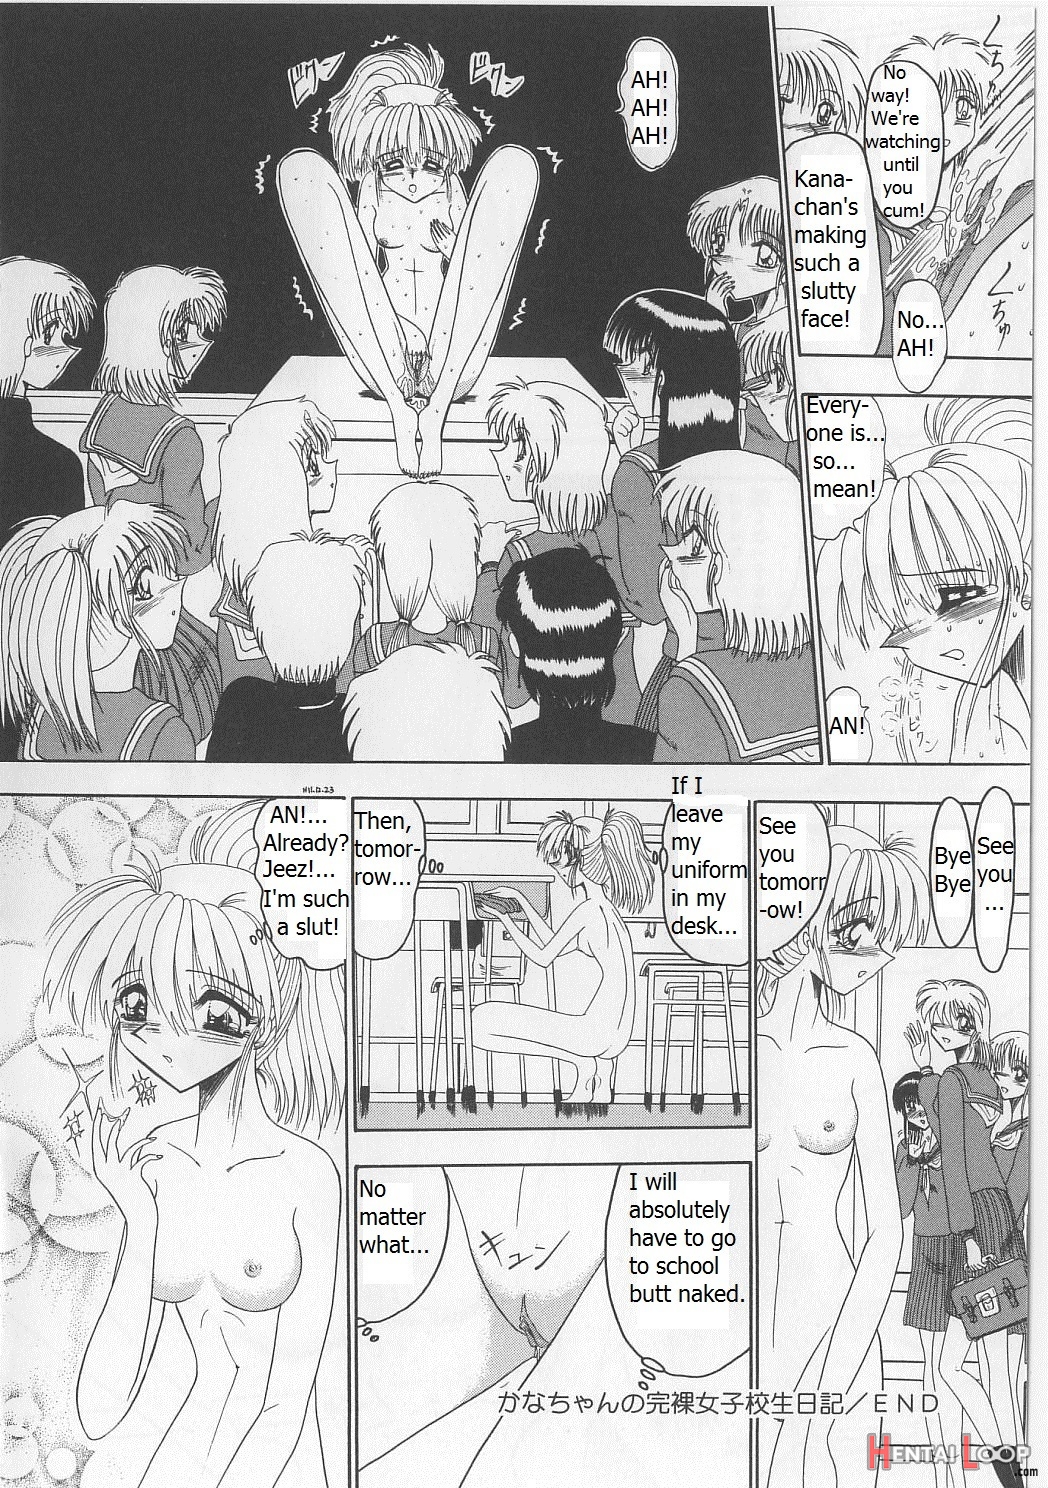 An Exhaustive Report On Masochistic Girls Ch 1 - 3 page 23